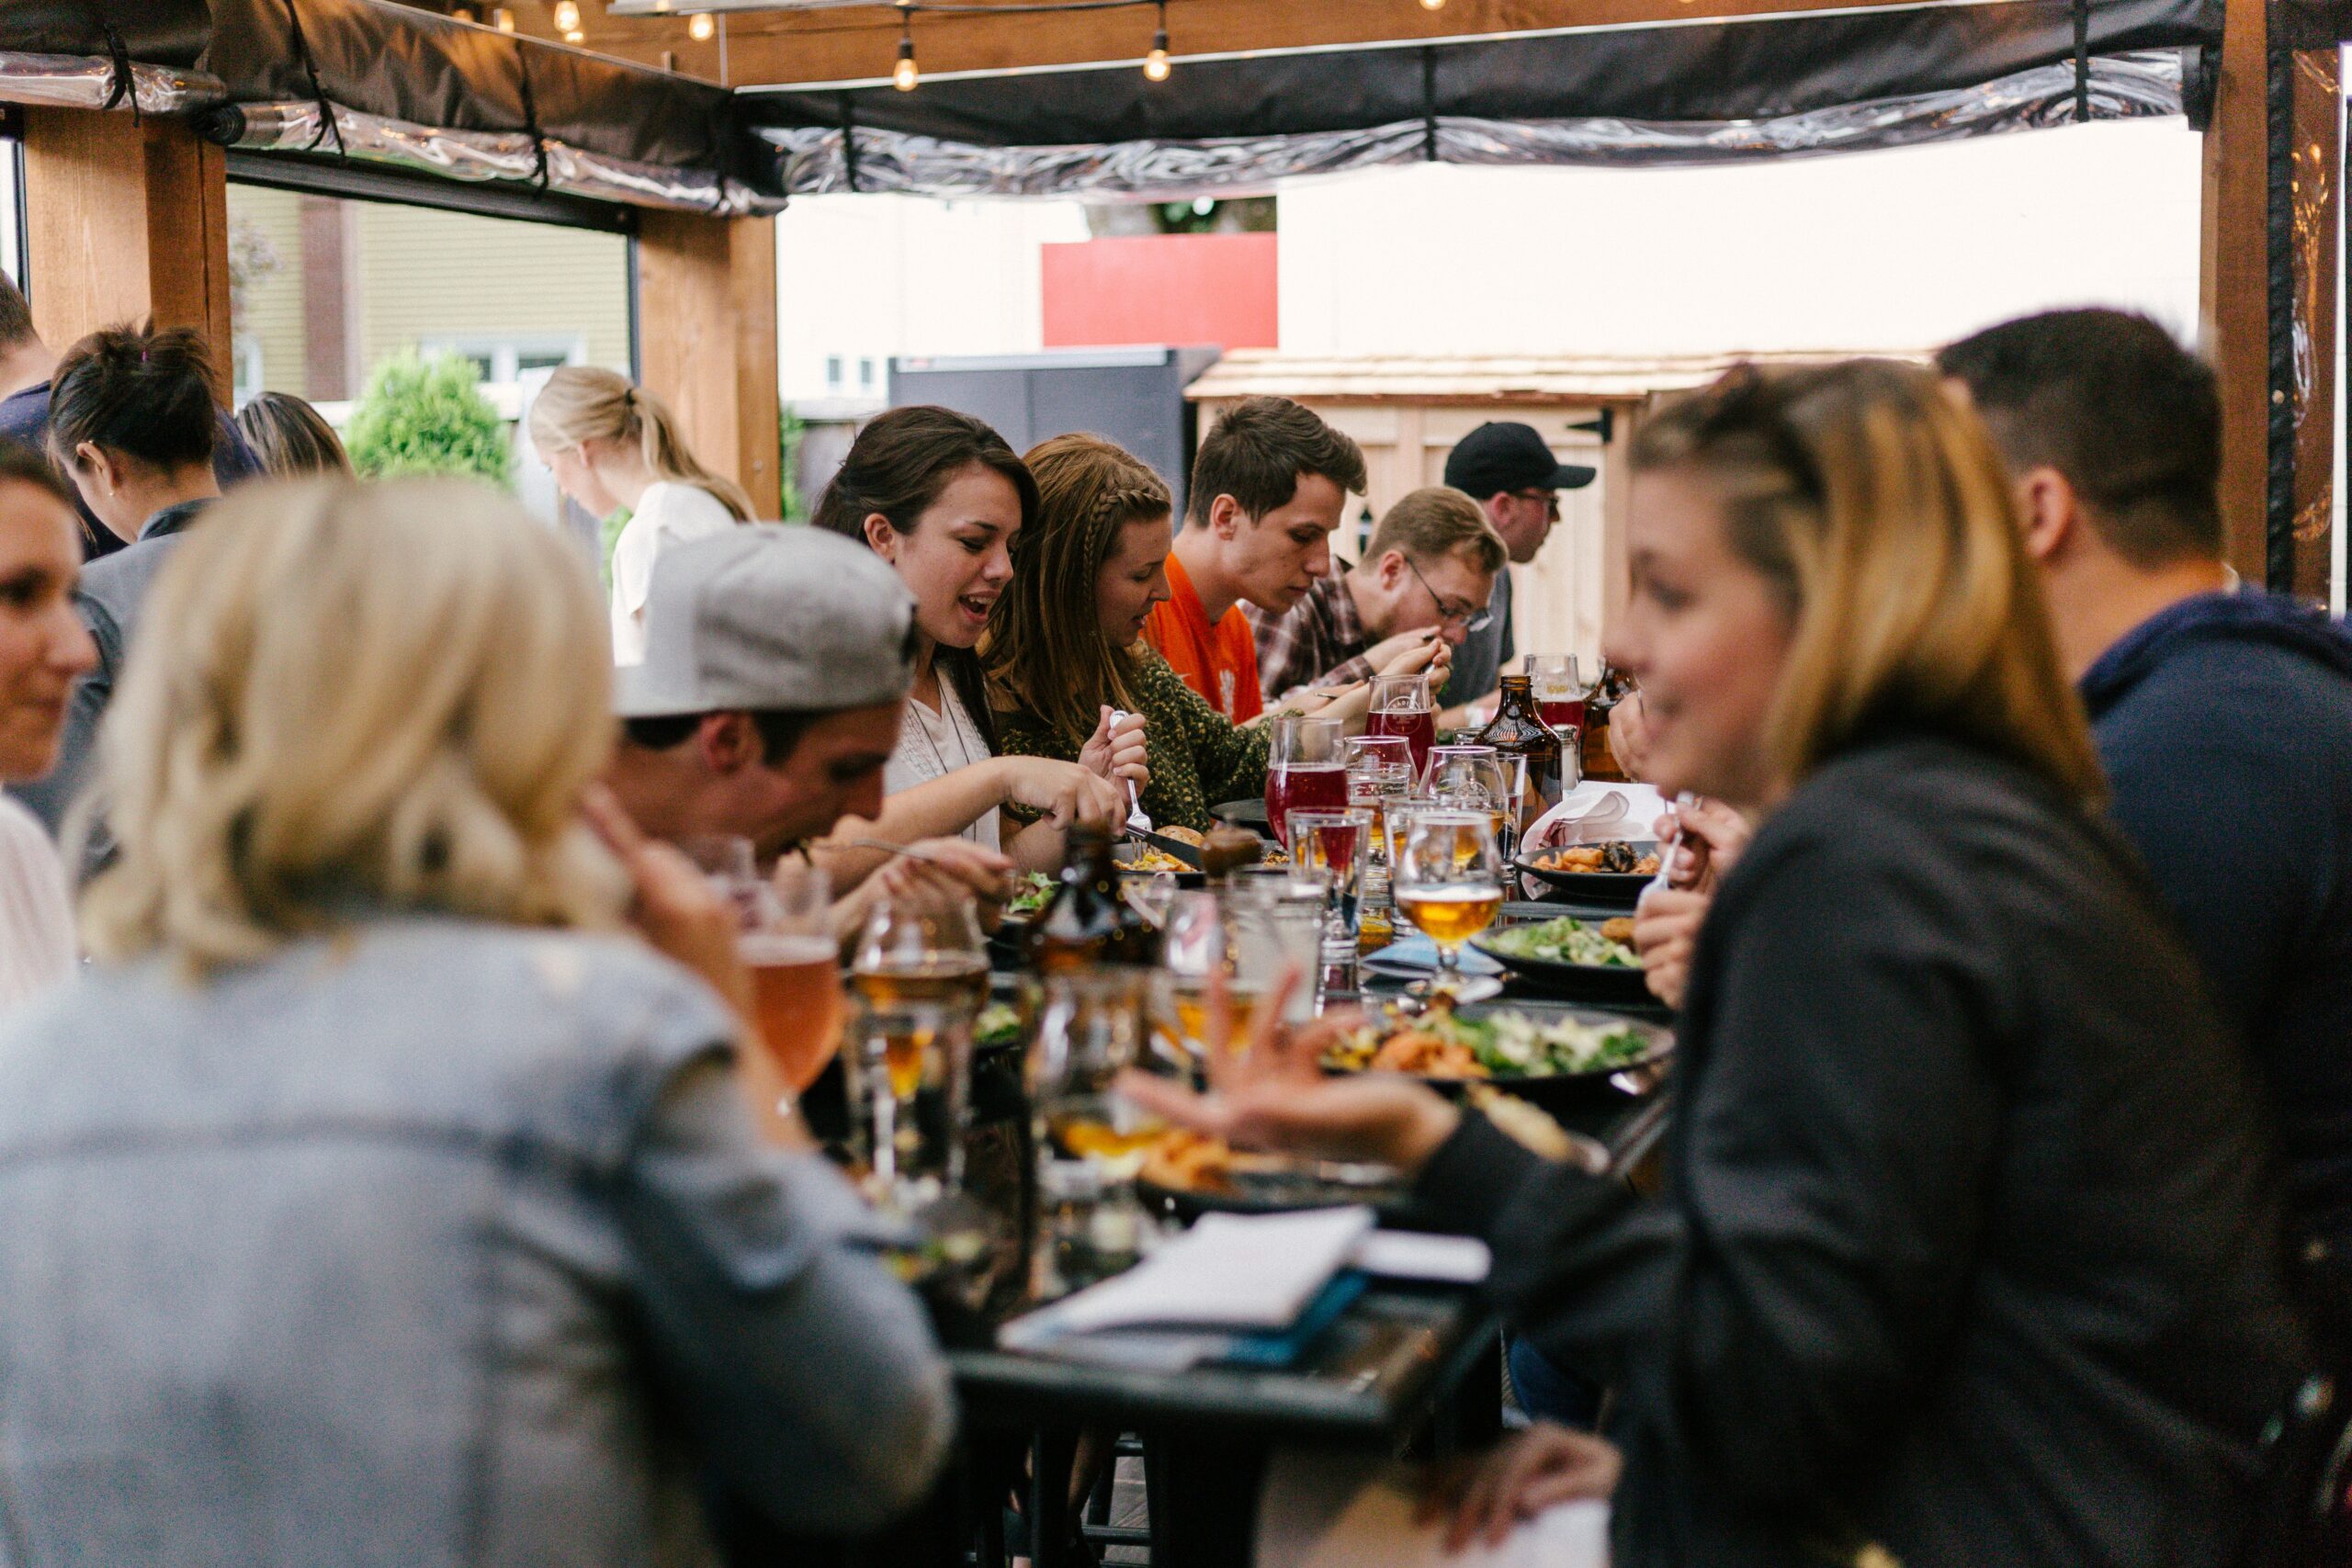 Diners sit at a community-style table and eat pub-style food and converse with each other.